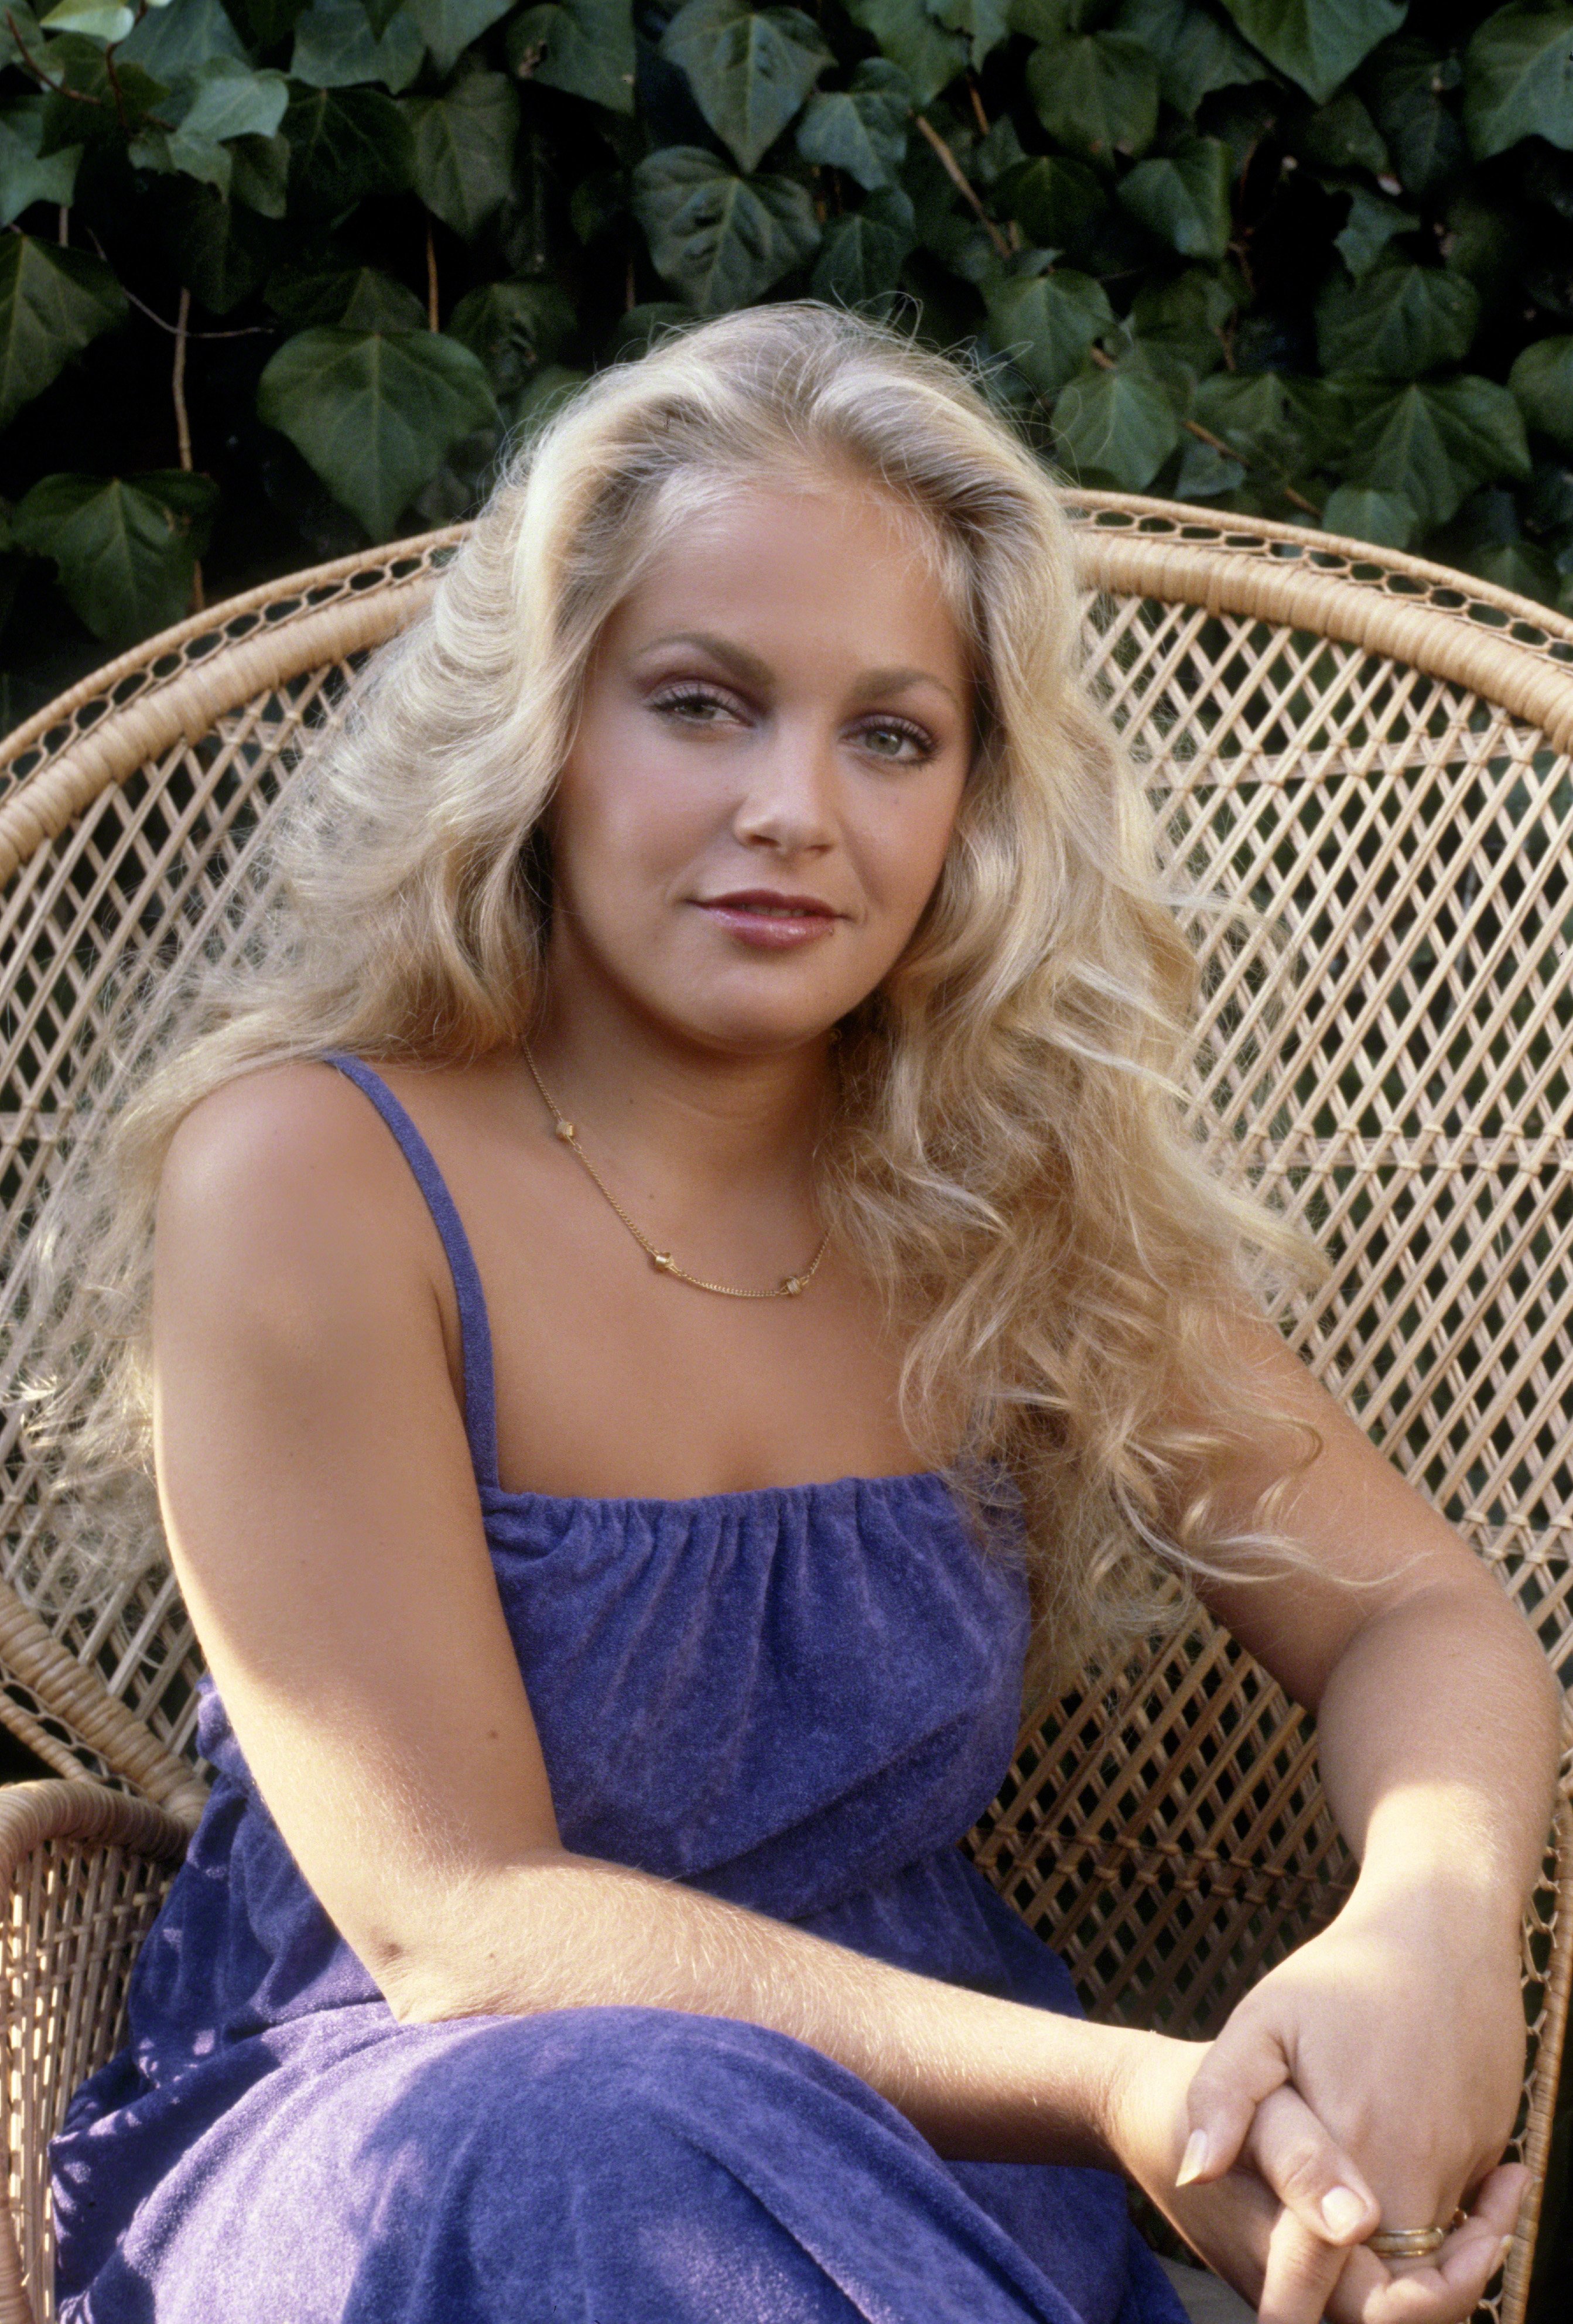 Charlene Tilton posing for a portrait, circa 1980. | Source: Images Press/IMAGES/Getty Images